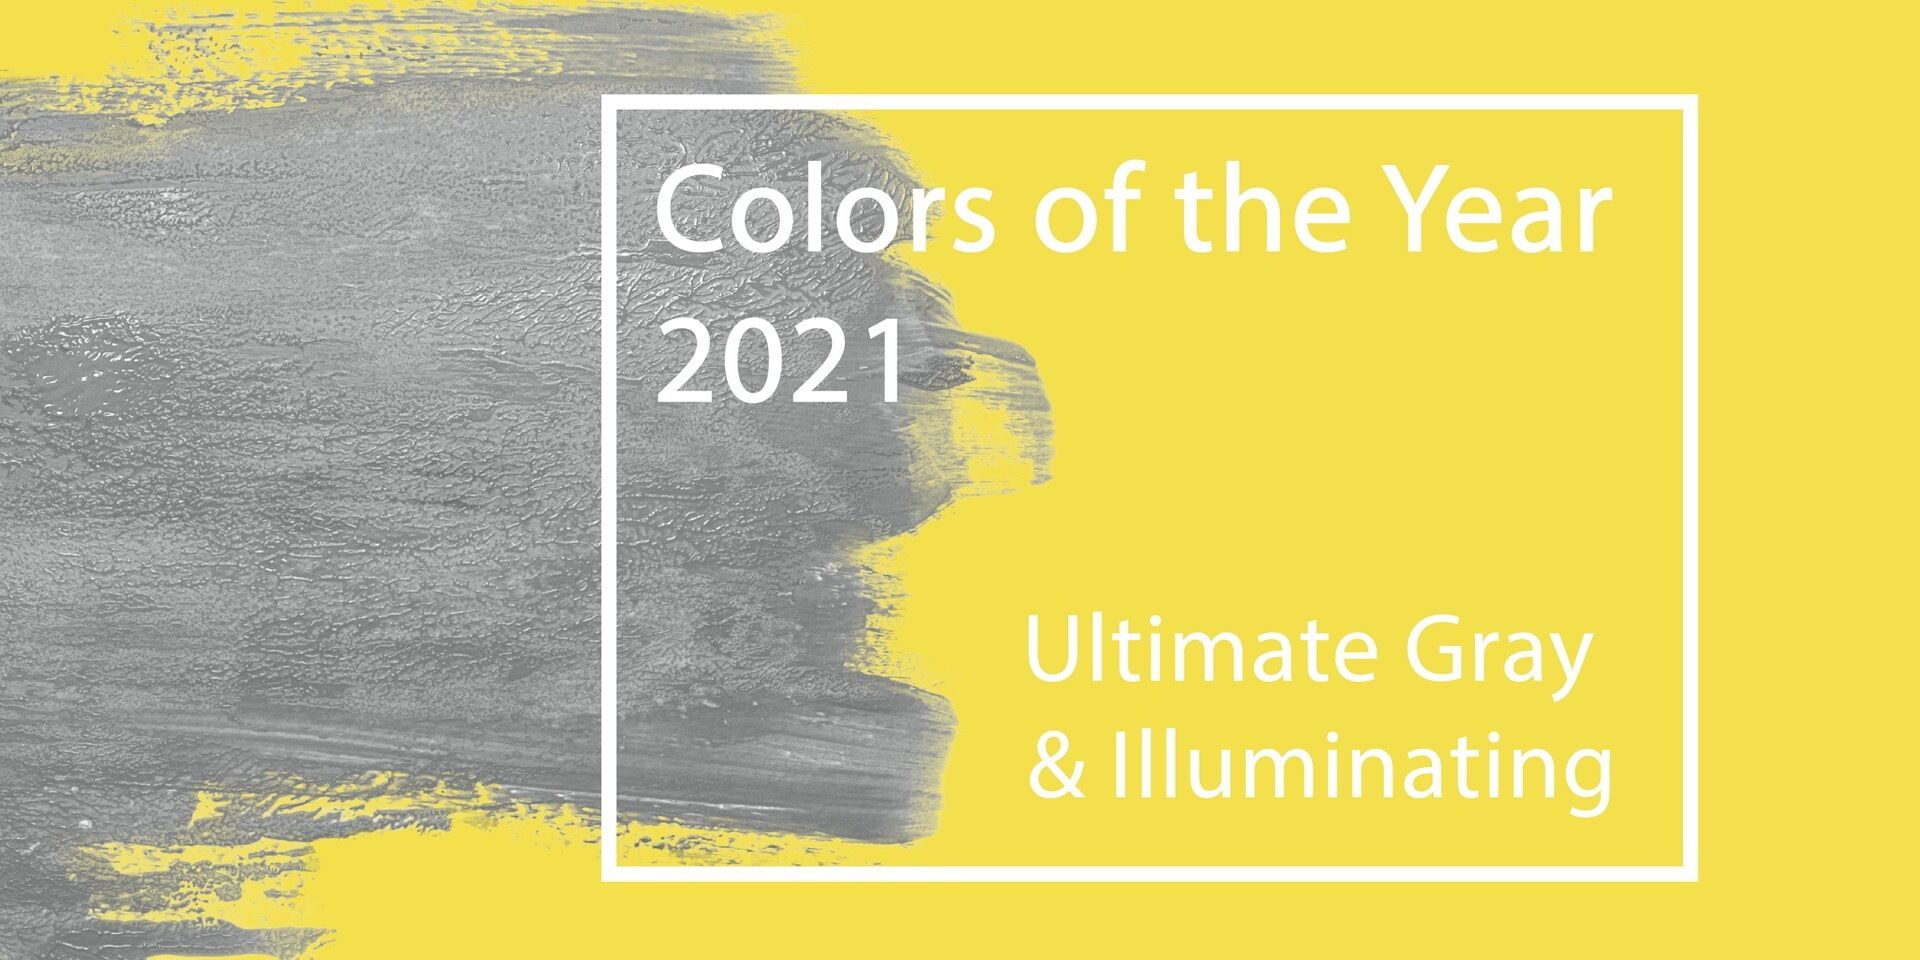 The colors of the year 2021 